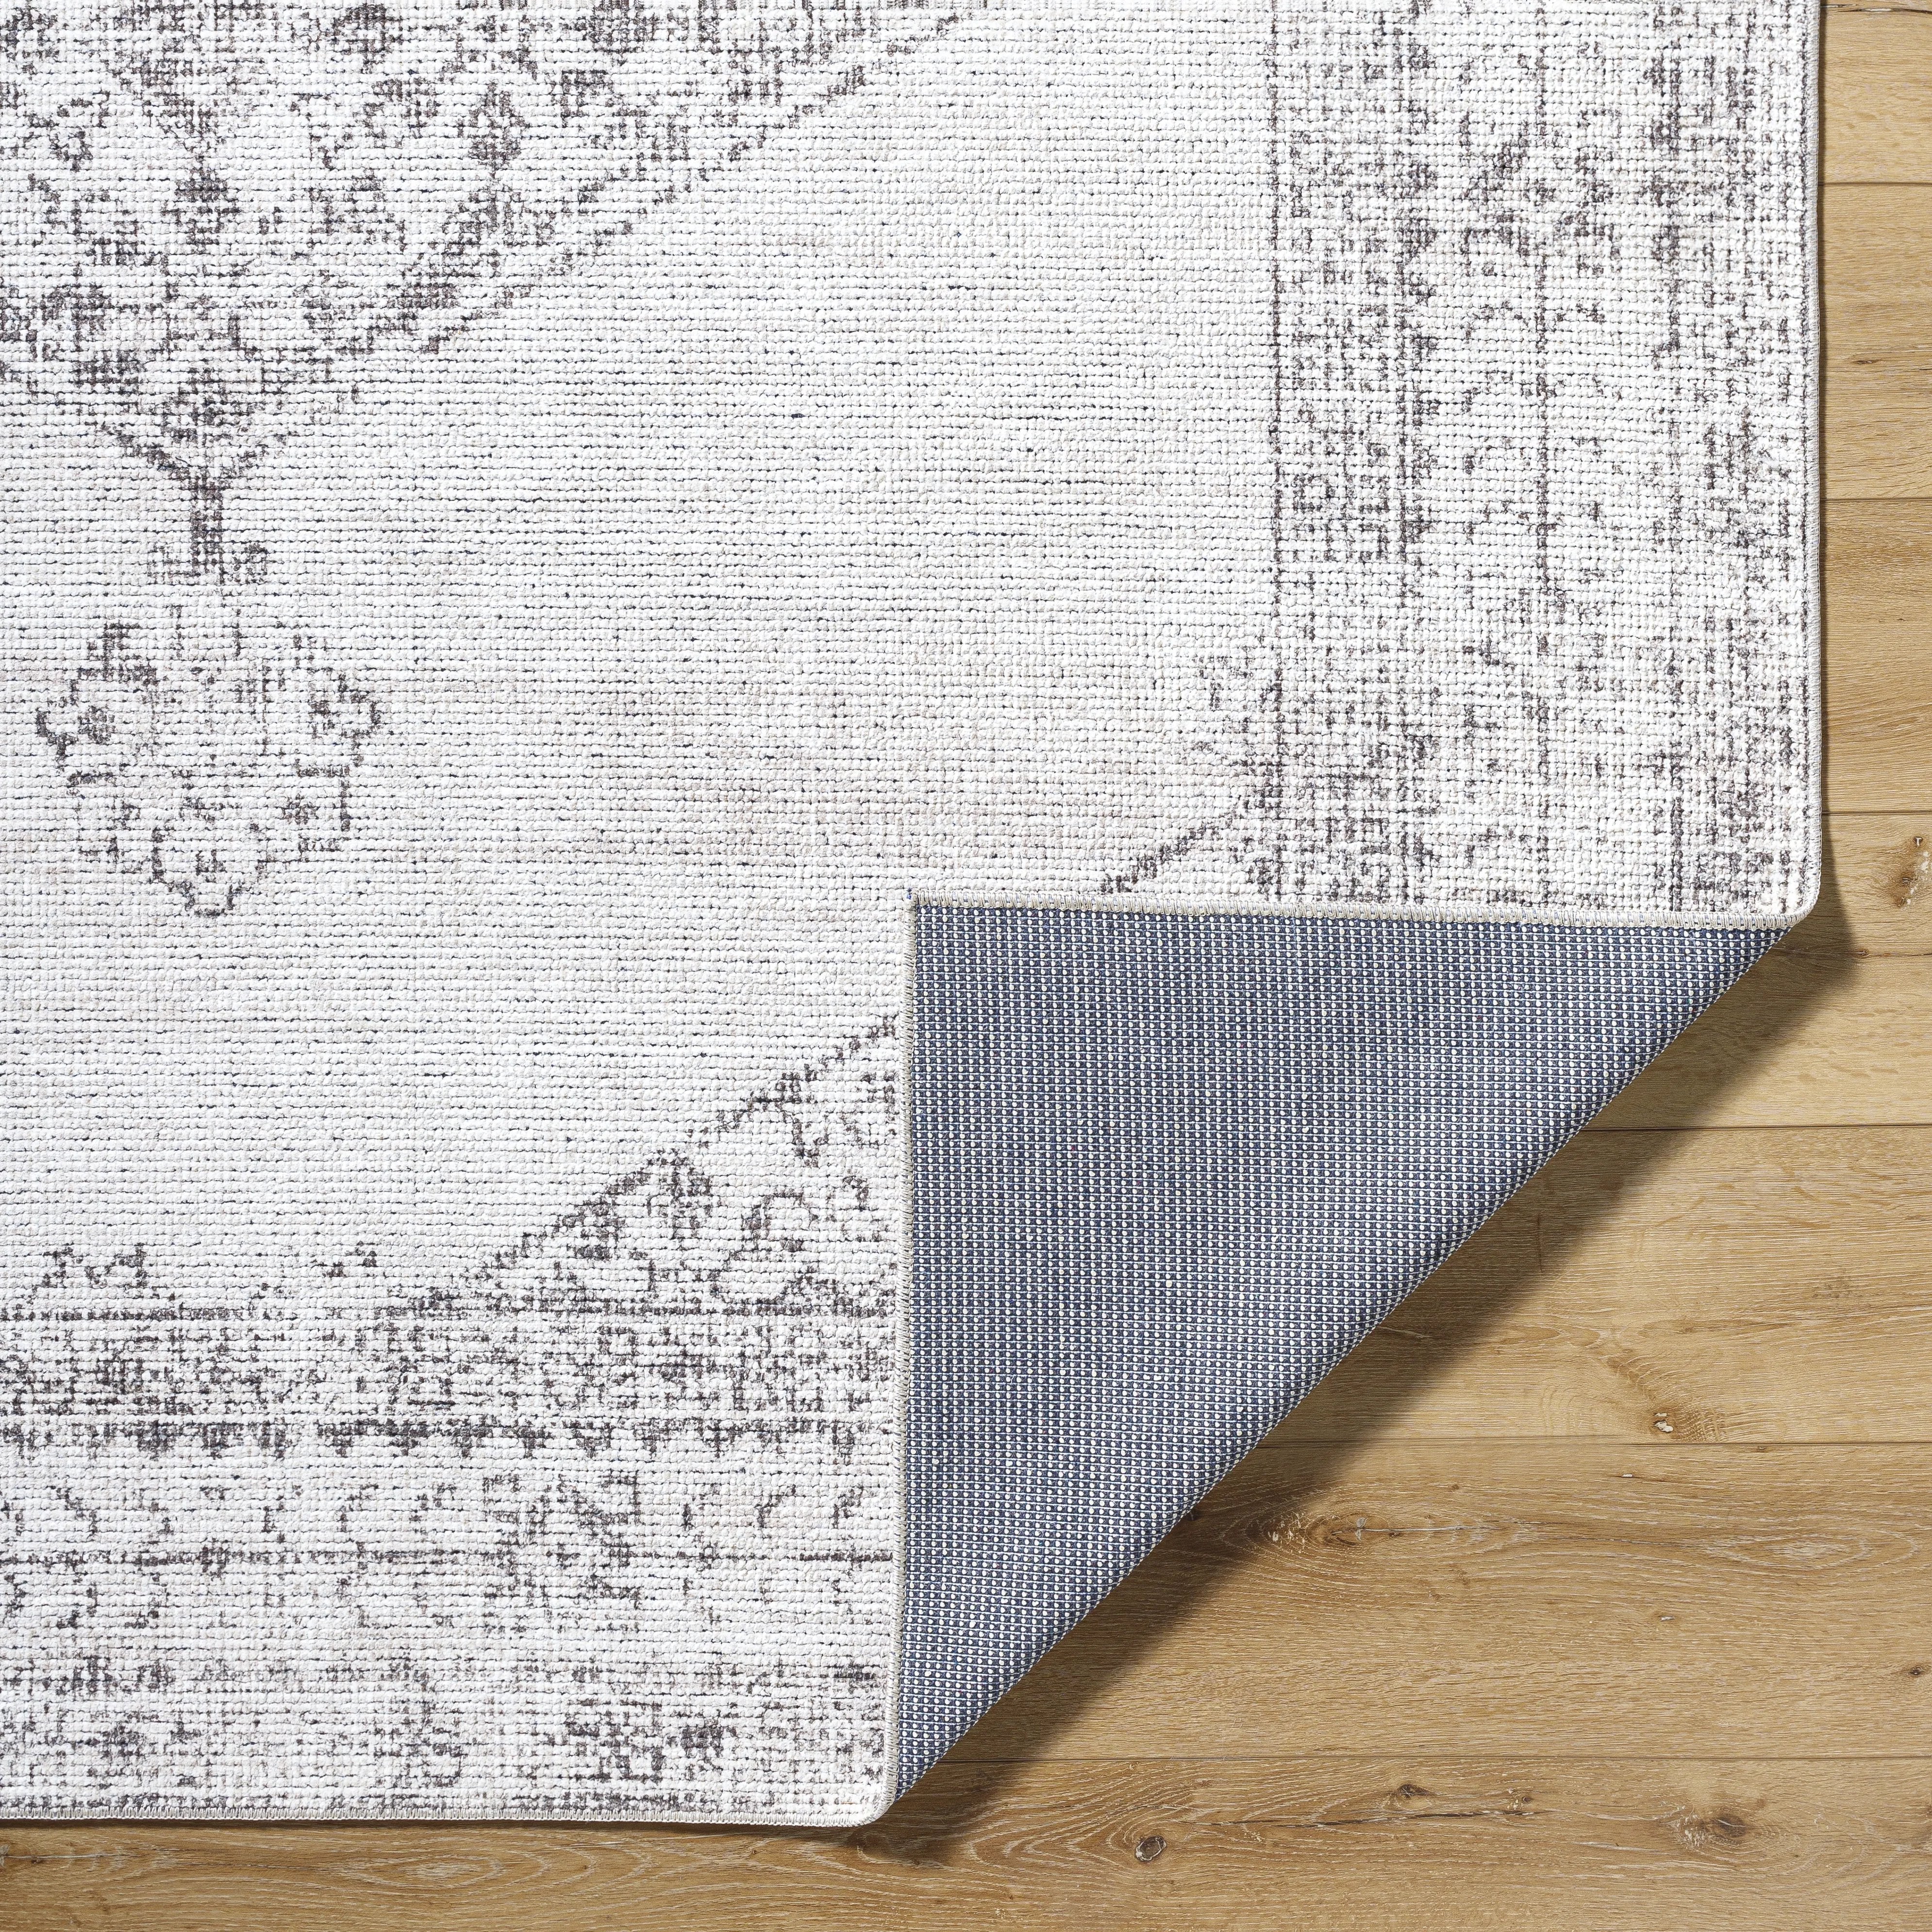 PNW Home x Surya available at Amethyst Home shipping to Australia, UK, and Canada. Organic modern design with easy to clean rugs for a family home in  the Alpharetta metro area.